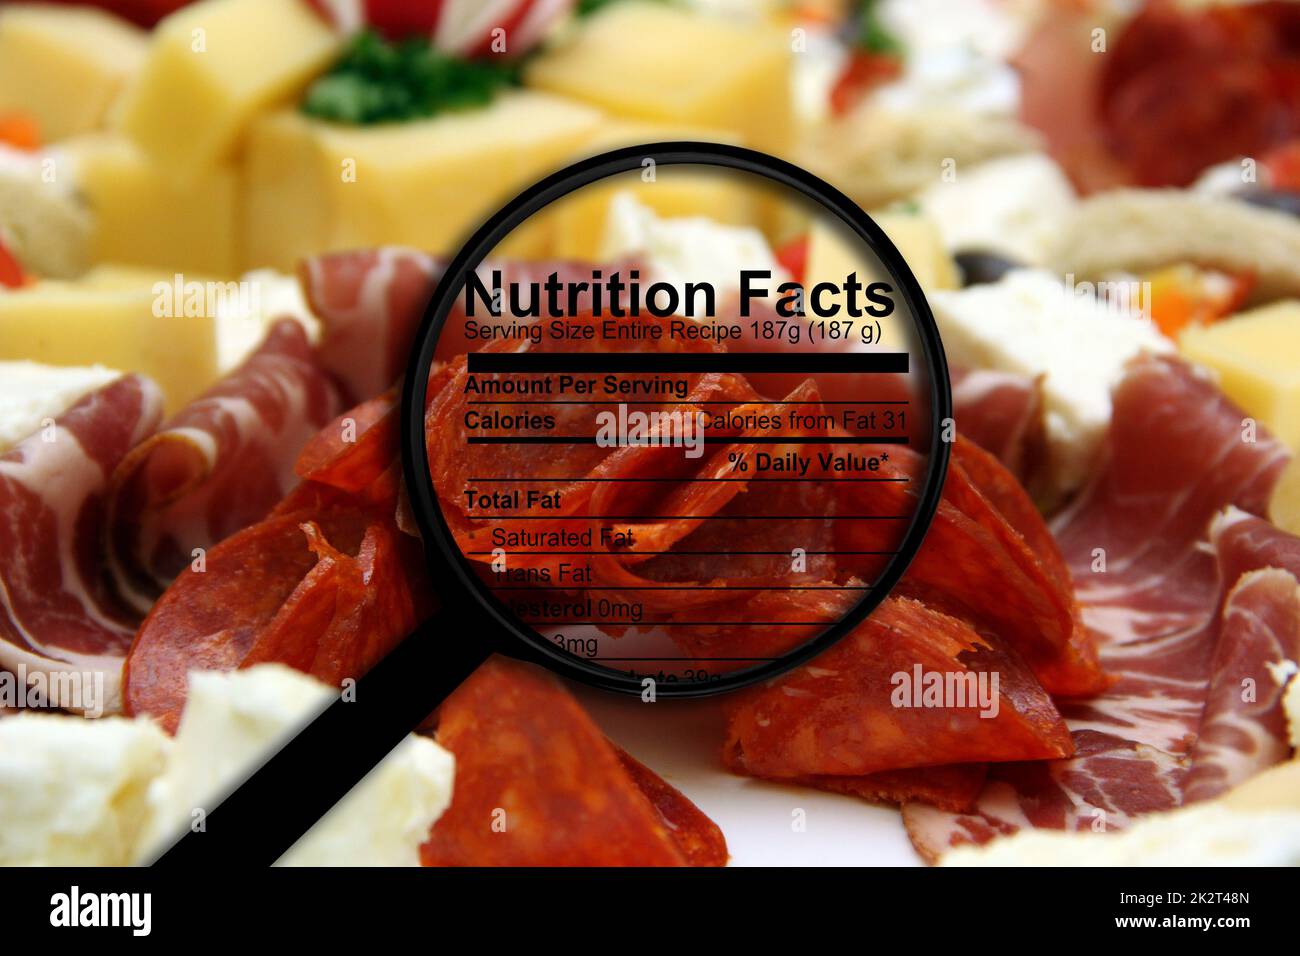 Nutrition facts on food Stock Photo